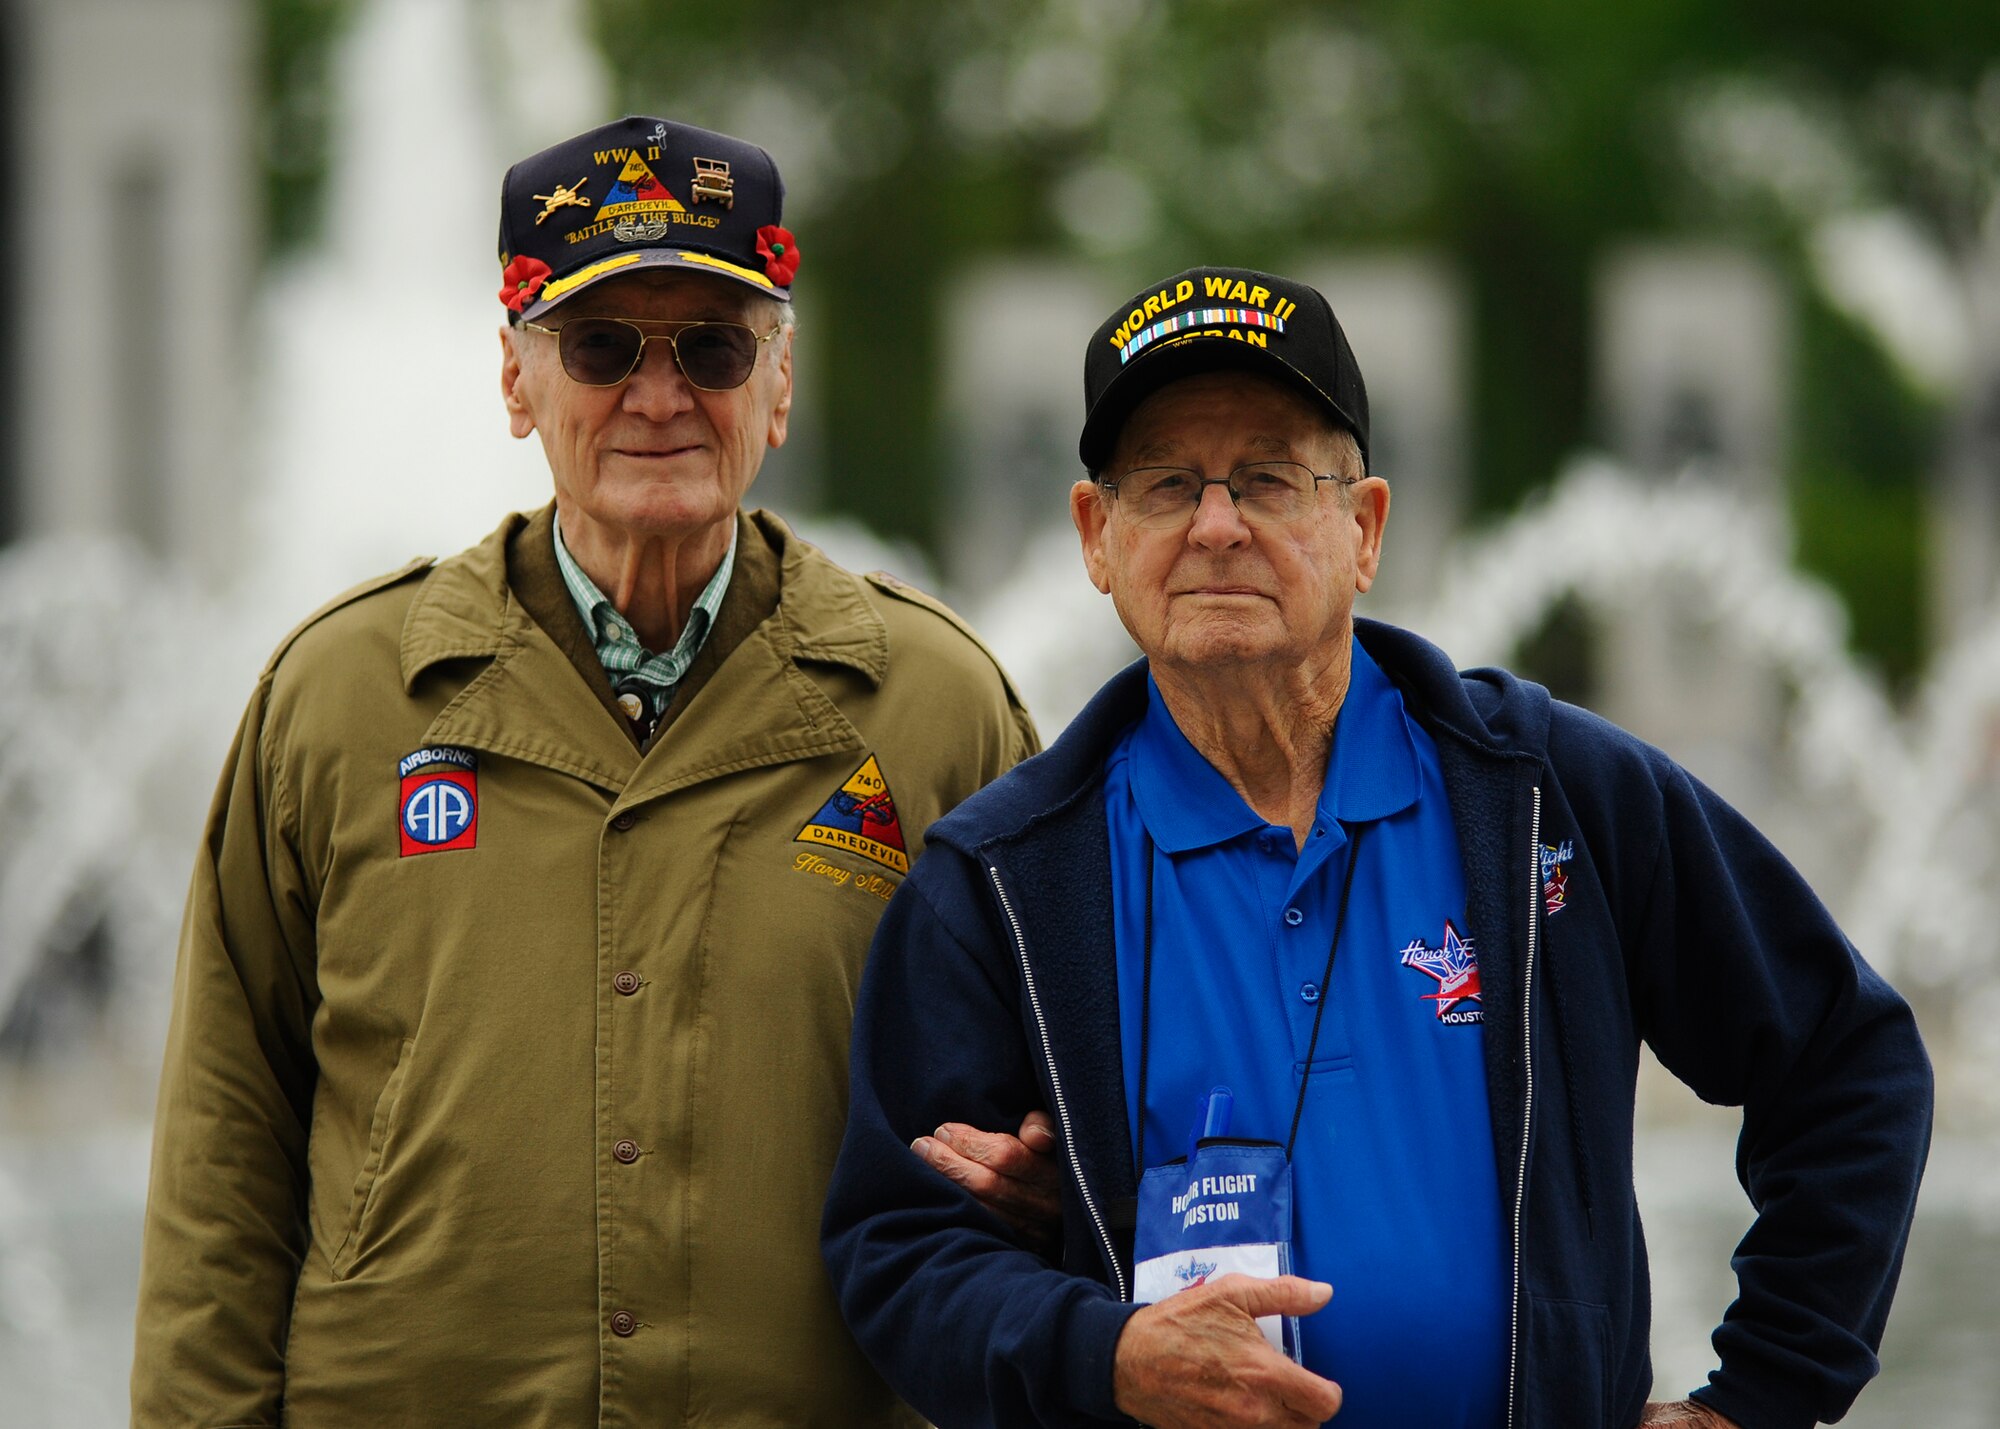 Harold Bradley and Harry Miller, both World War II Army veterans, reunite during an honor flight trip at the National World War II Memorial in Washington D.C., April 30, 2016. Bradley and Miller served in the same unit for the Army at the Battle of the Bulge and were able to reunite when Bradley was selected to participate with Honor Flight Houston. (U.S. Air Force photo/Tech. Sgt. Bryan Franks)